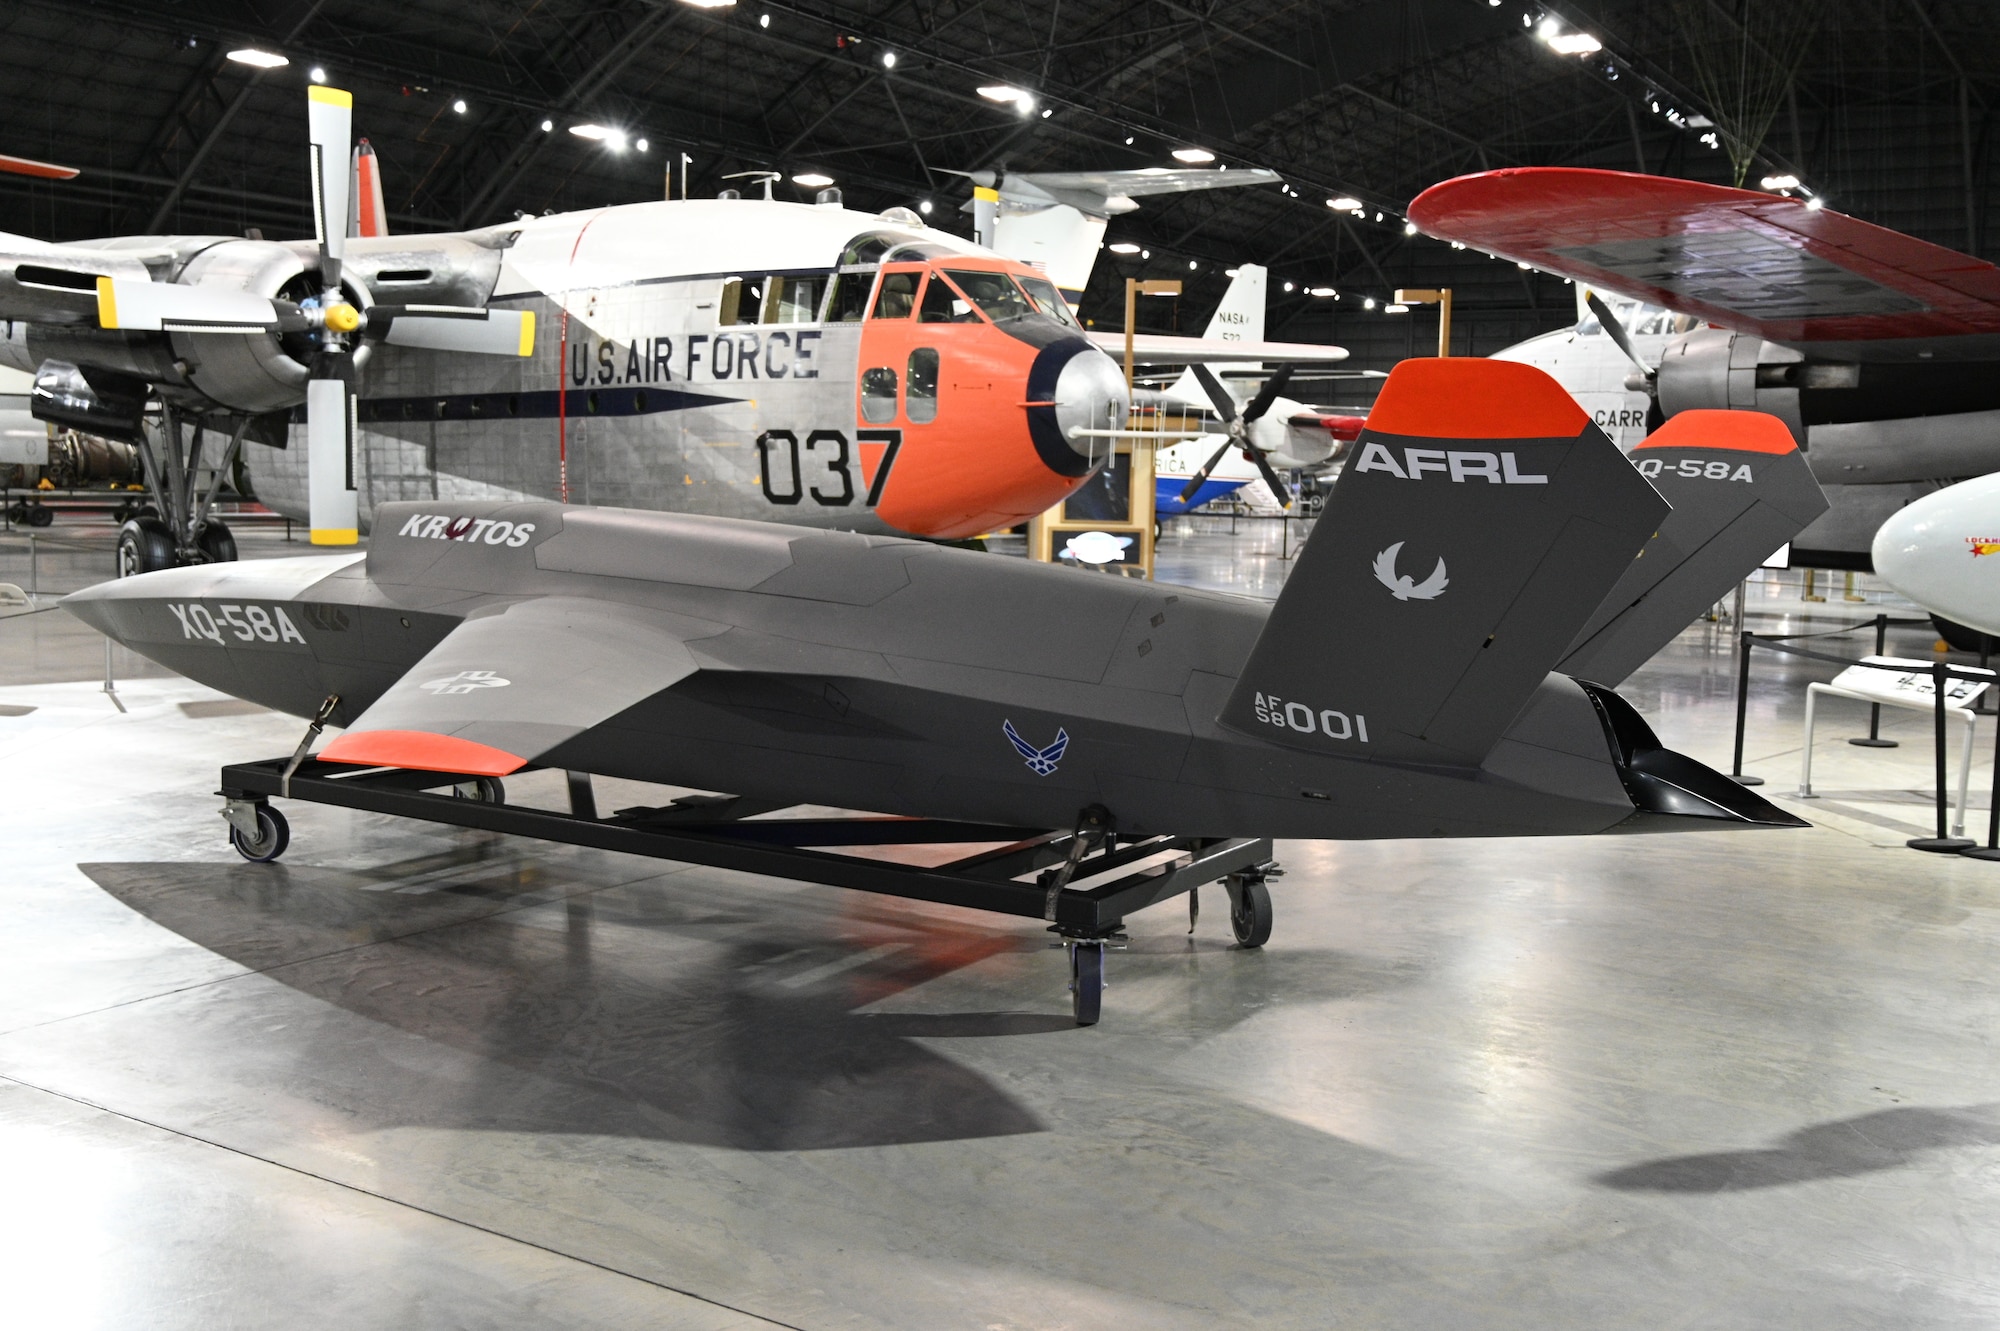 XQ-58A Valkyrie aircraft towed to National Museum USAF.